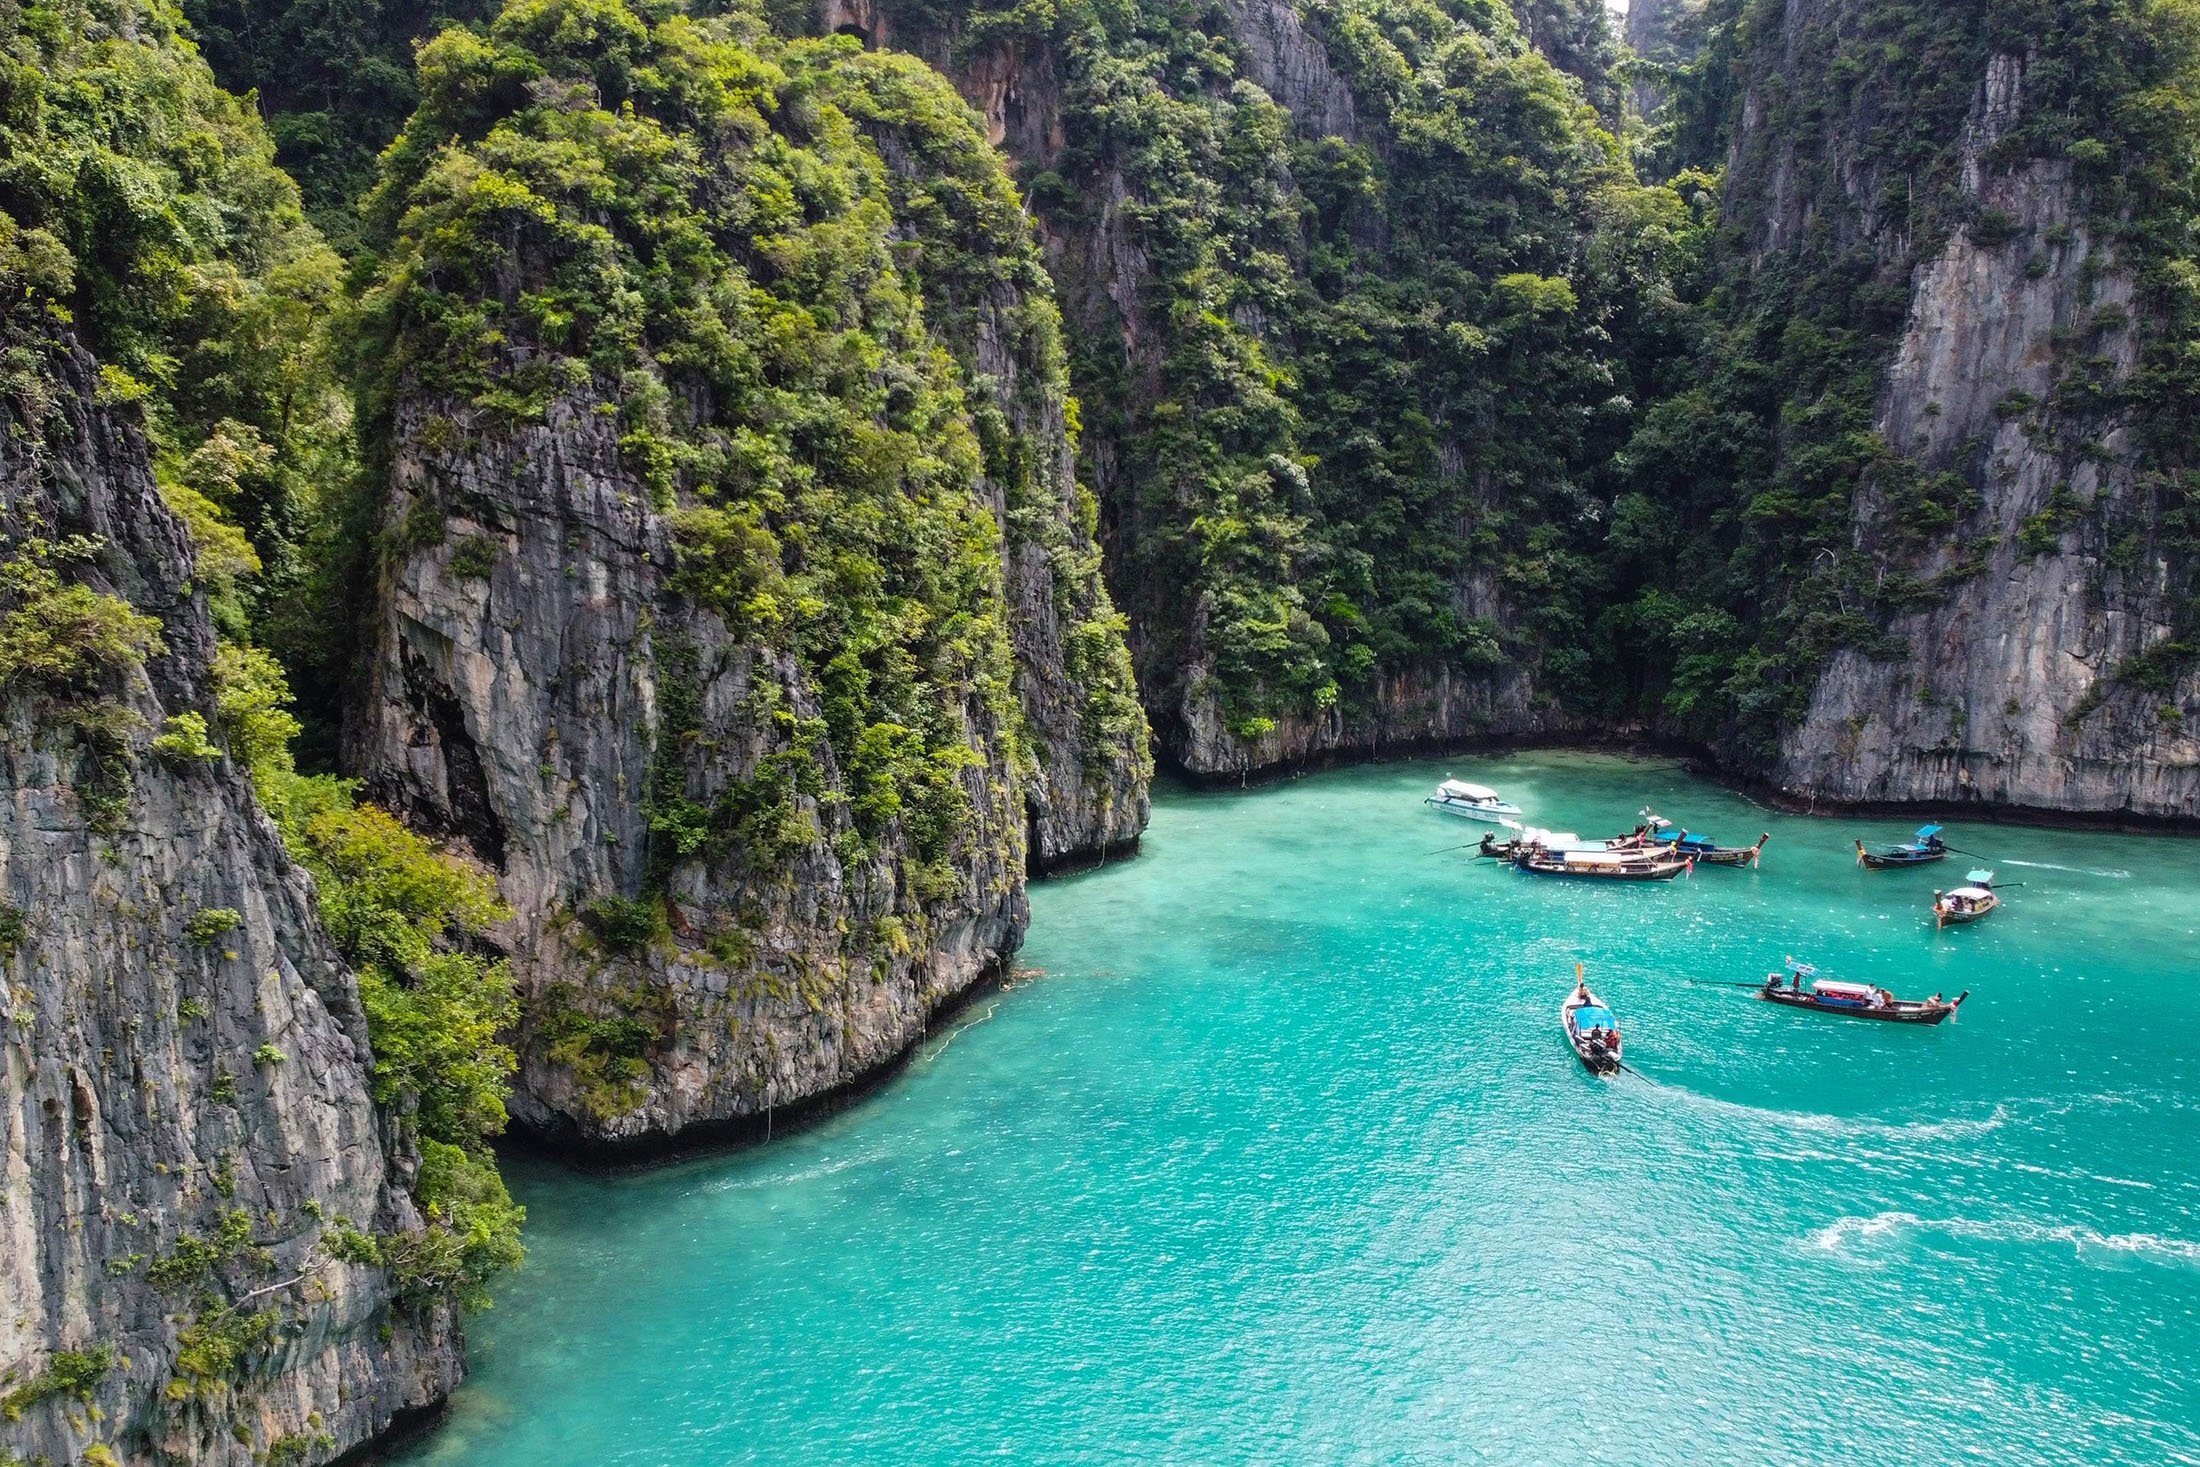 Tourists enter Pi Leh Bay in longtail boats on the Phi Phi Leh island, Thailand, Nov. 26, 2021. (AFP Photo)